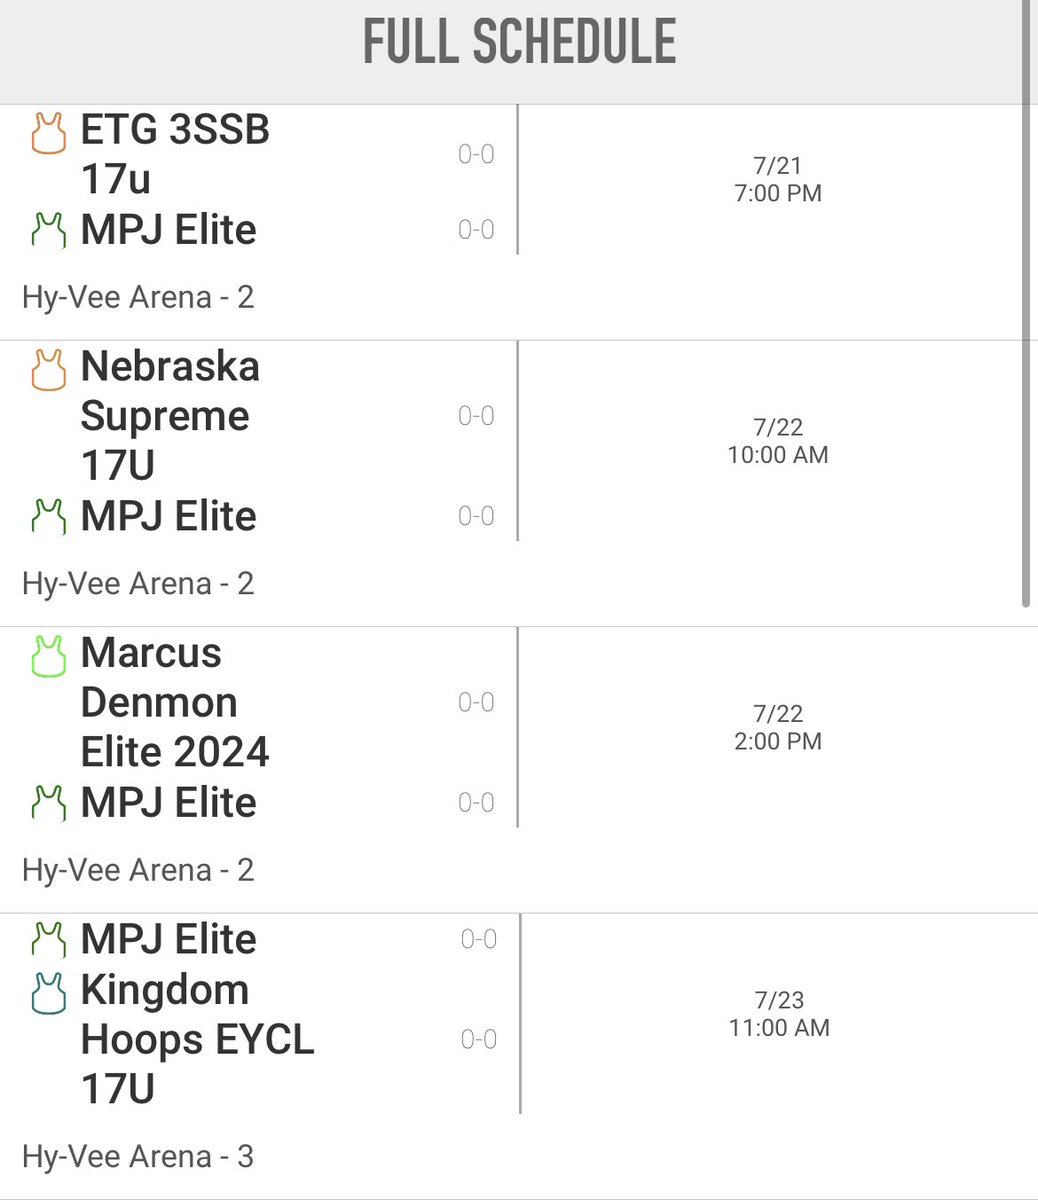 Coaches, here is my schedule for the @HardwoodEvents x @RL_Hoops Sunflower Showcase.